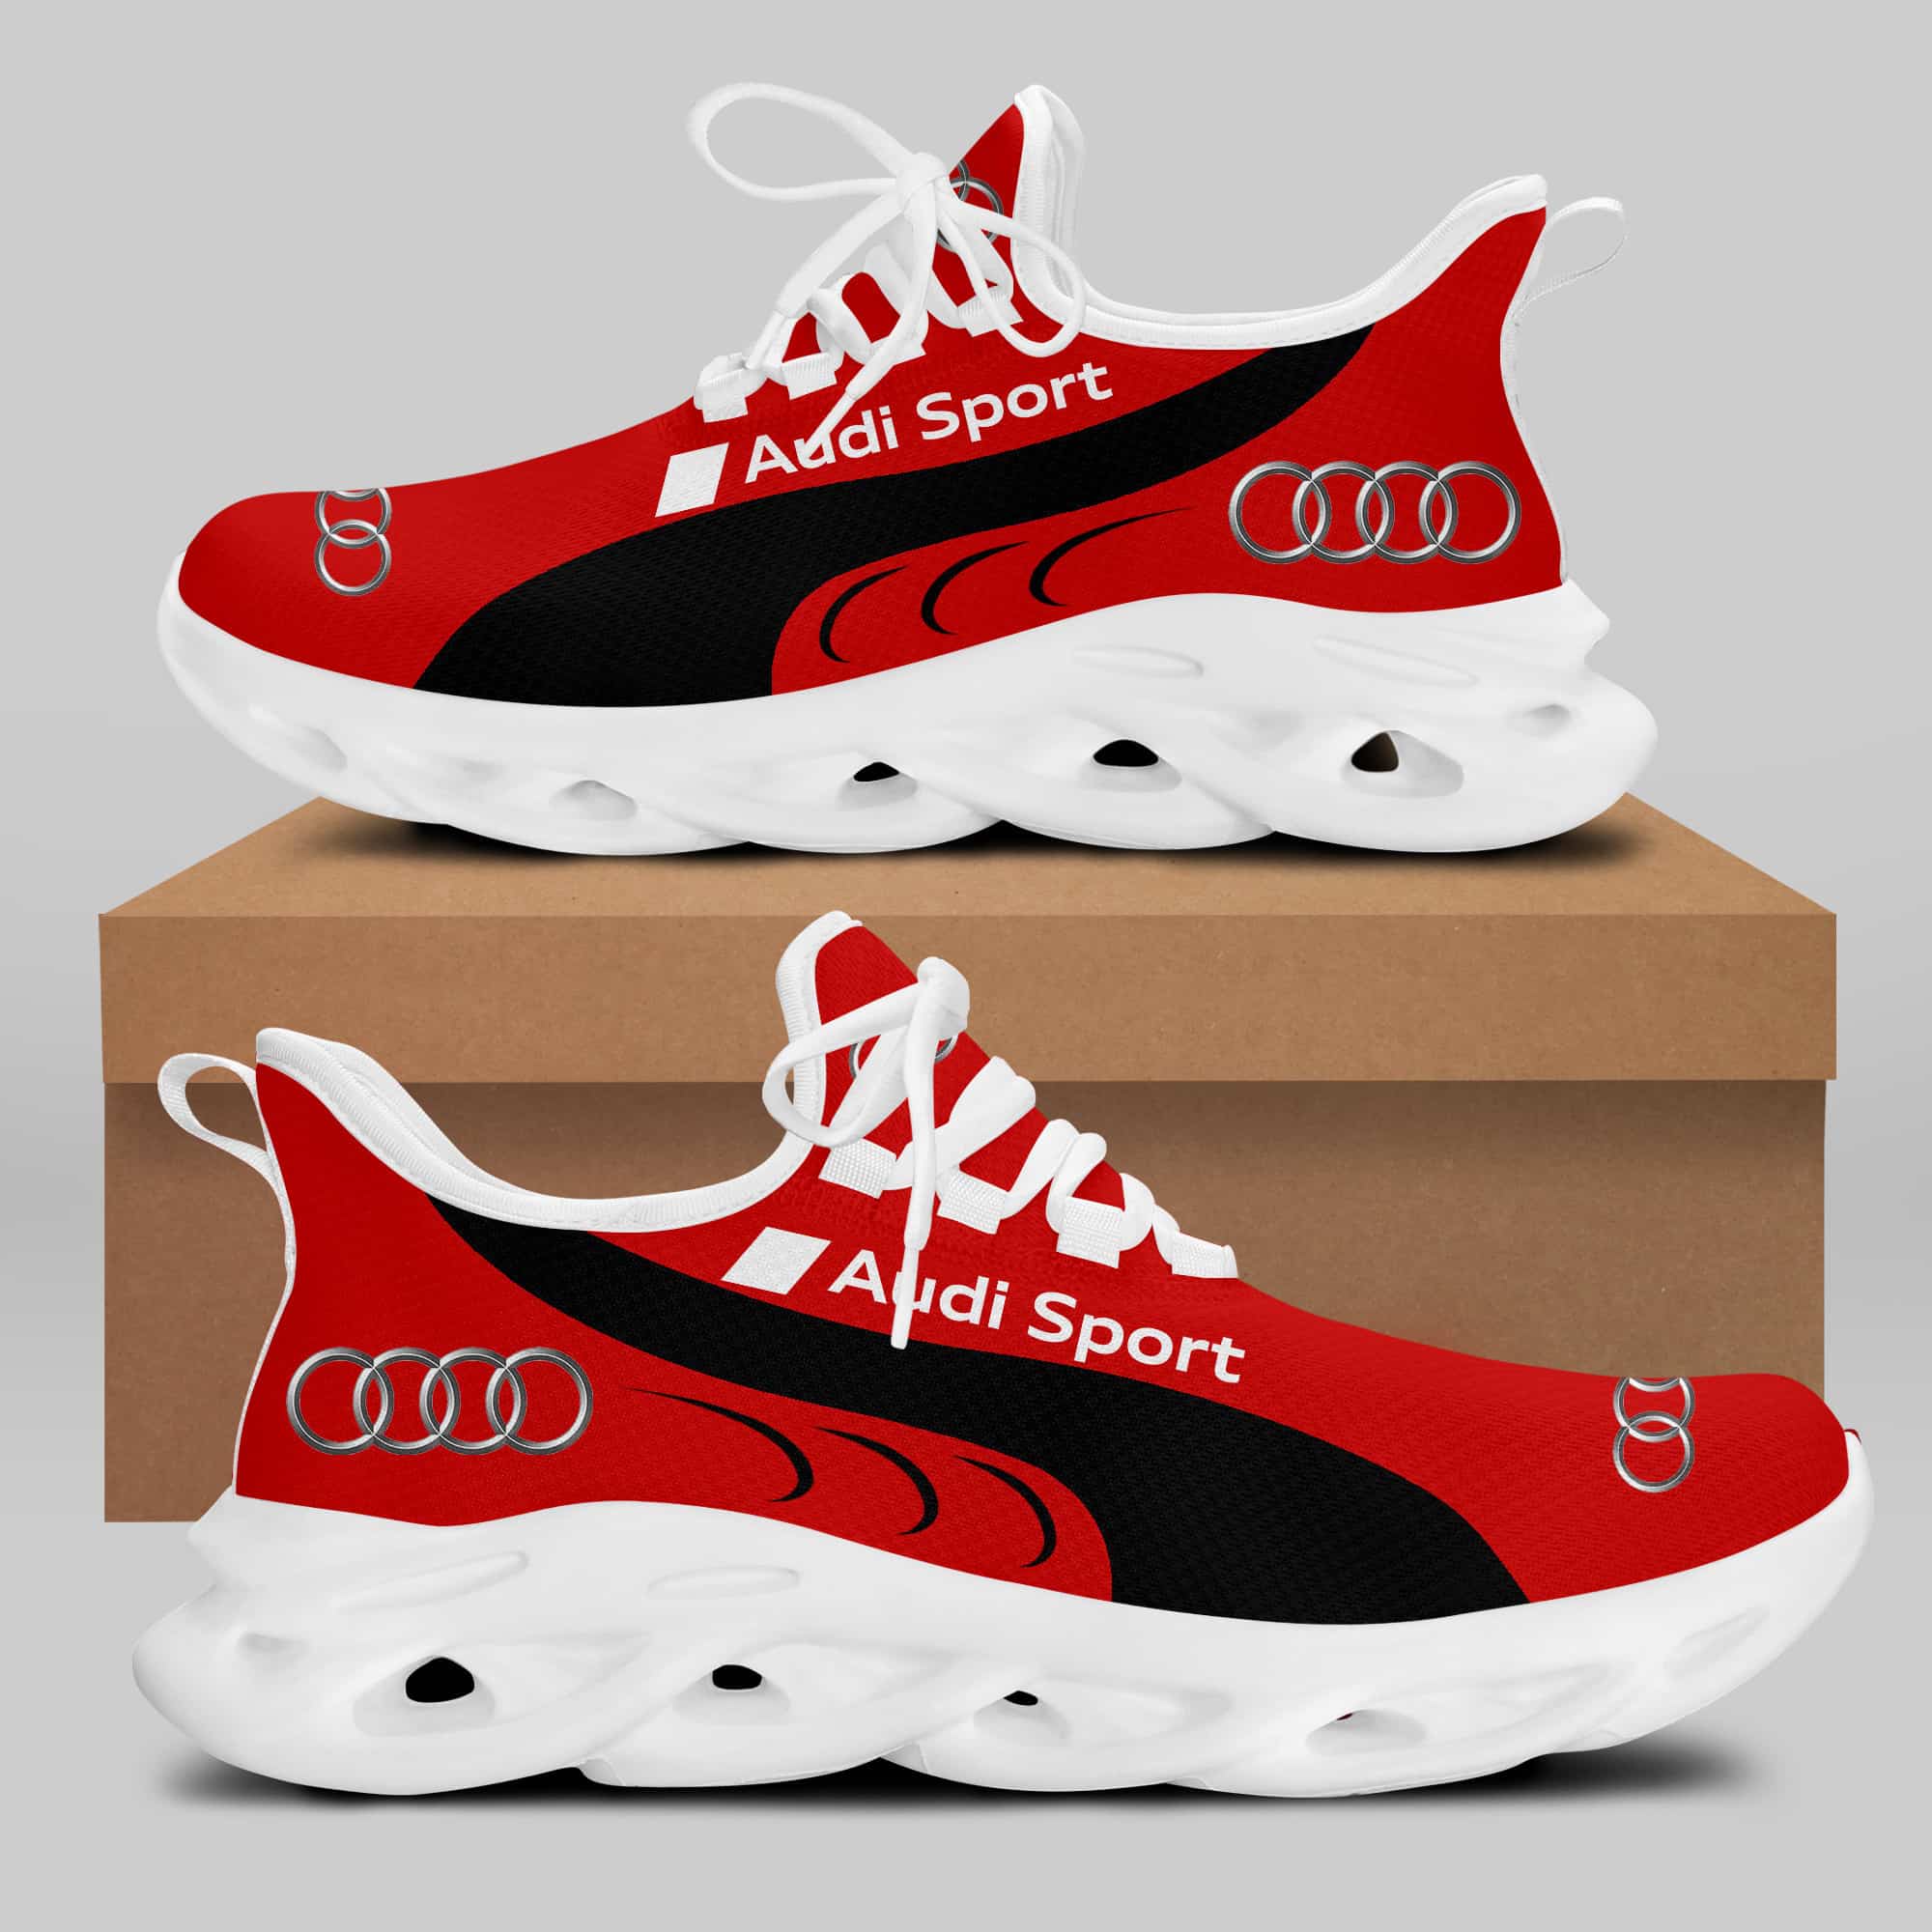 Audi Sport Running Shoes Max Soul Shoes Sneakers Ver 30 2